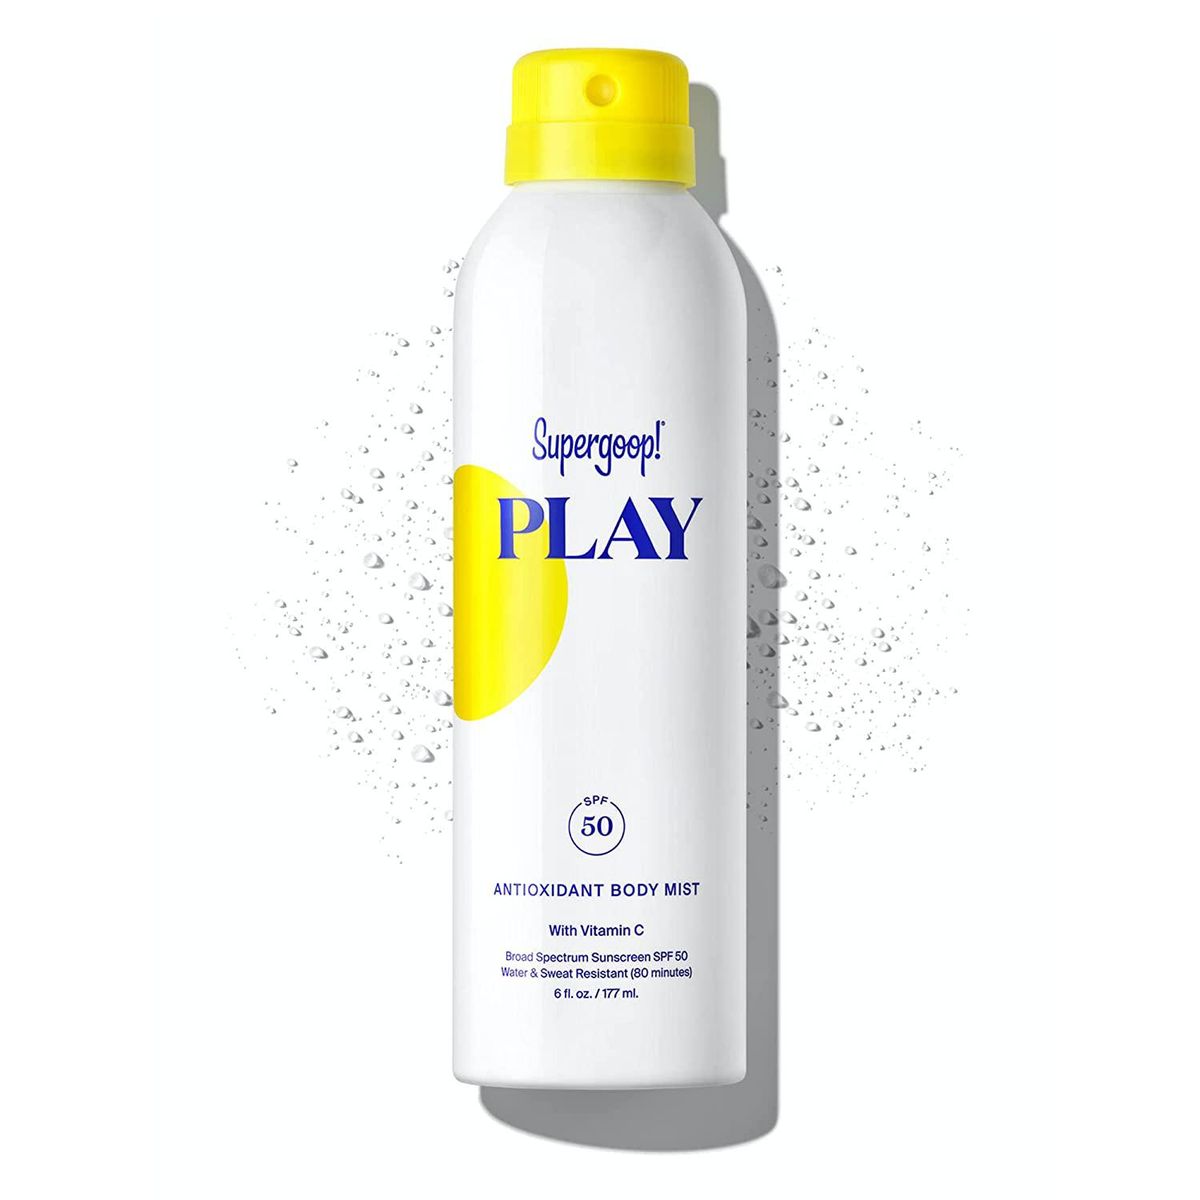 Play SPF 50 Antioxidant-Infused Body Mis